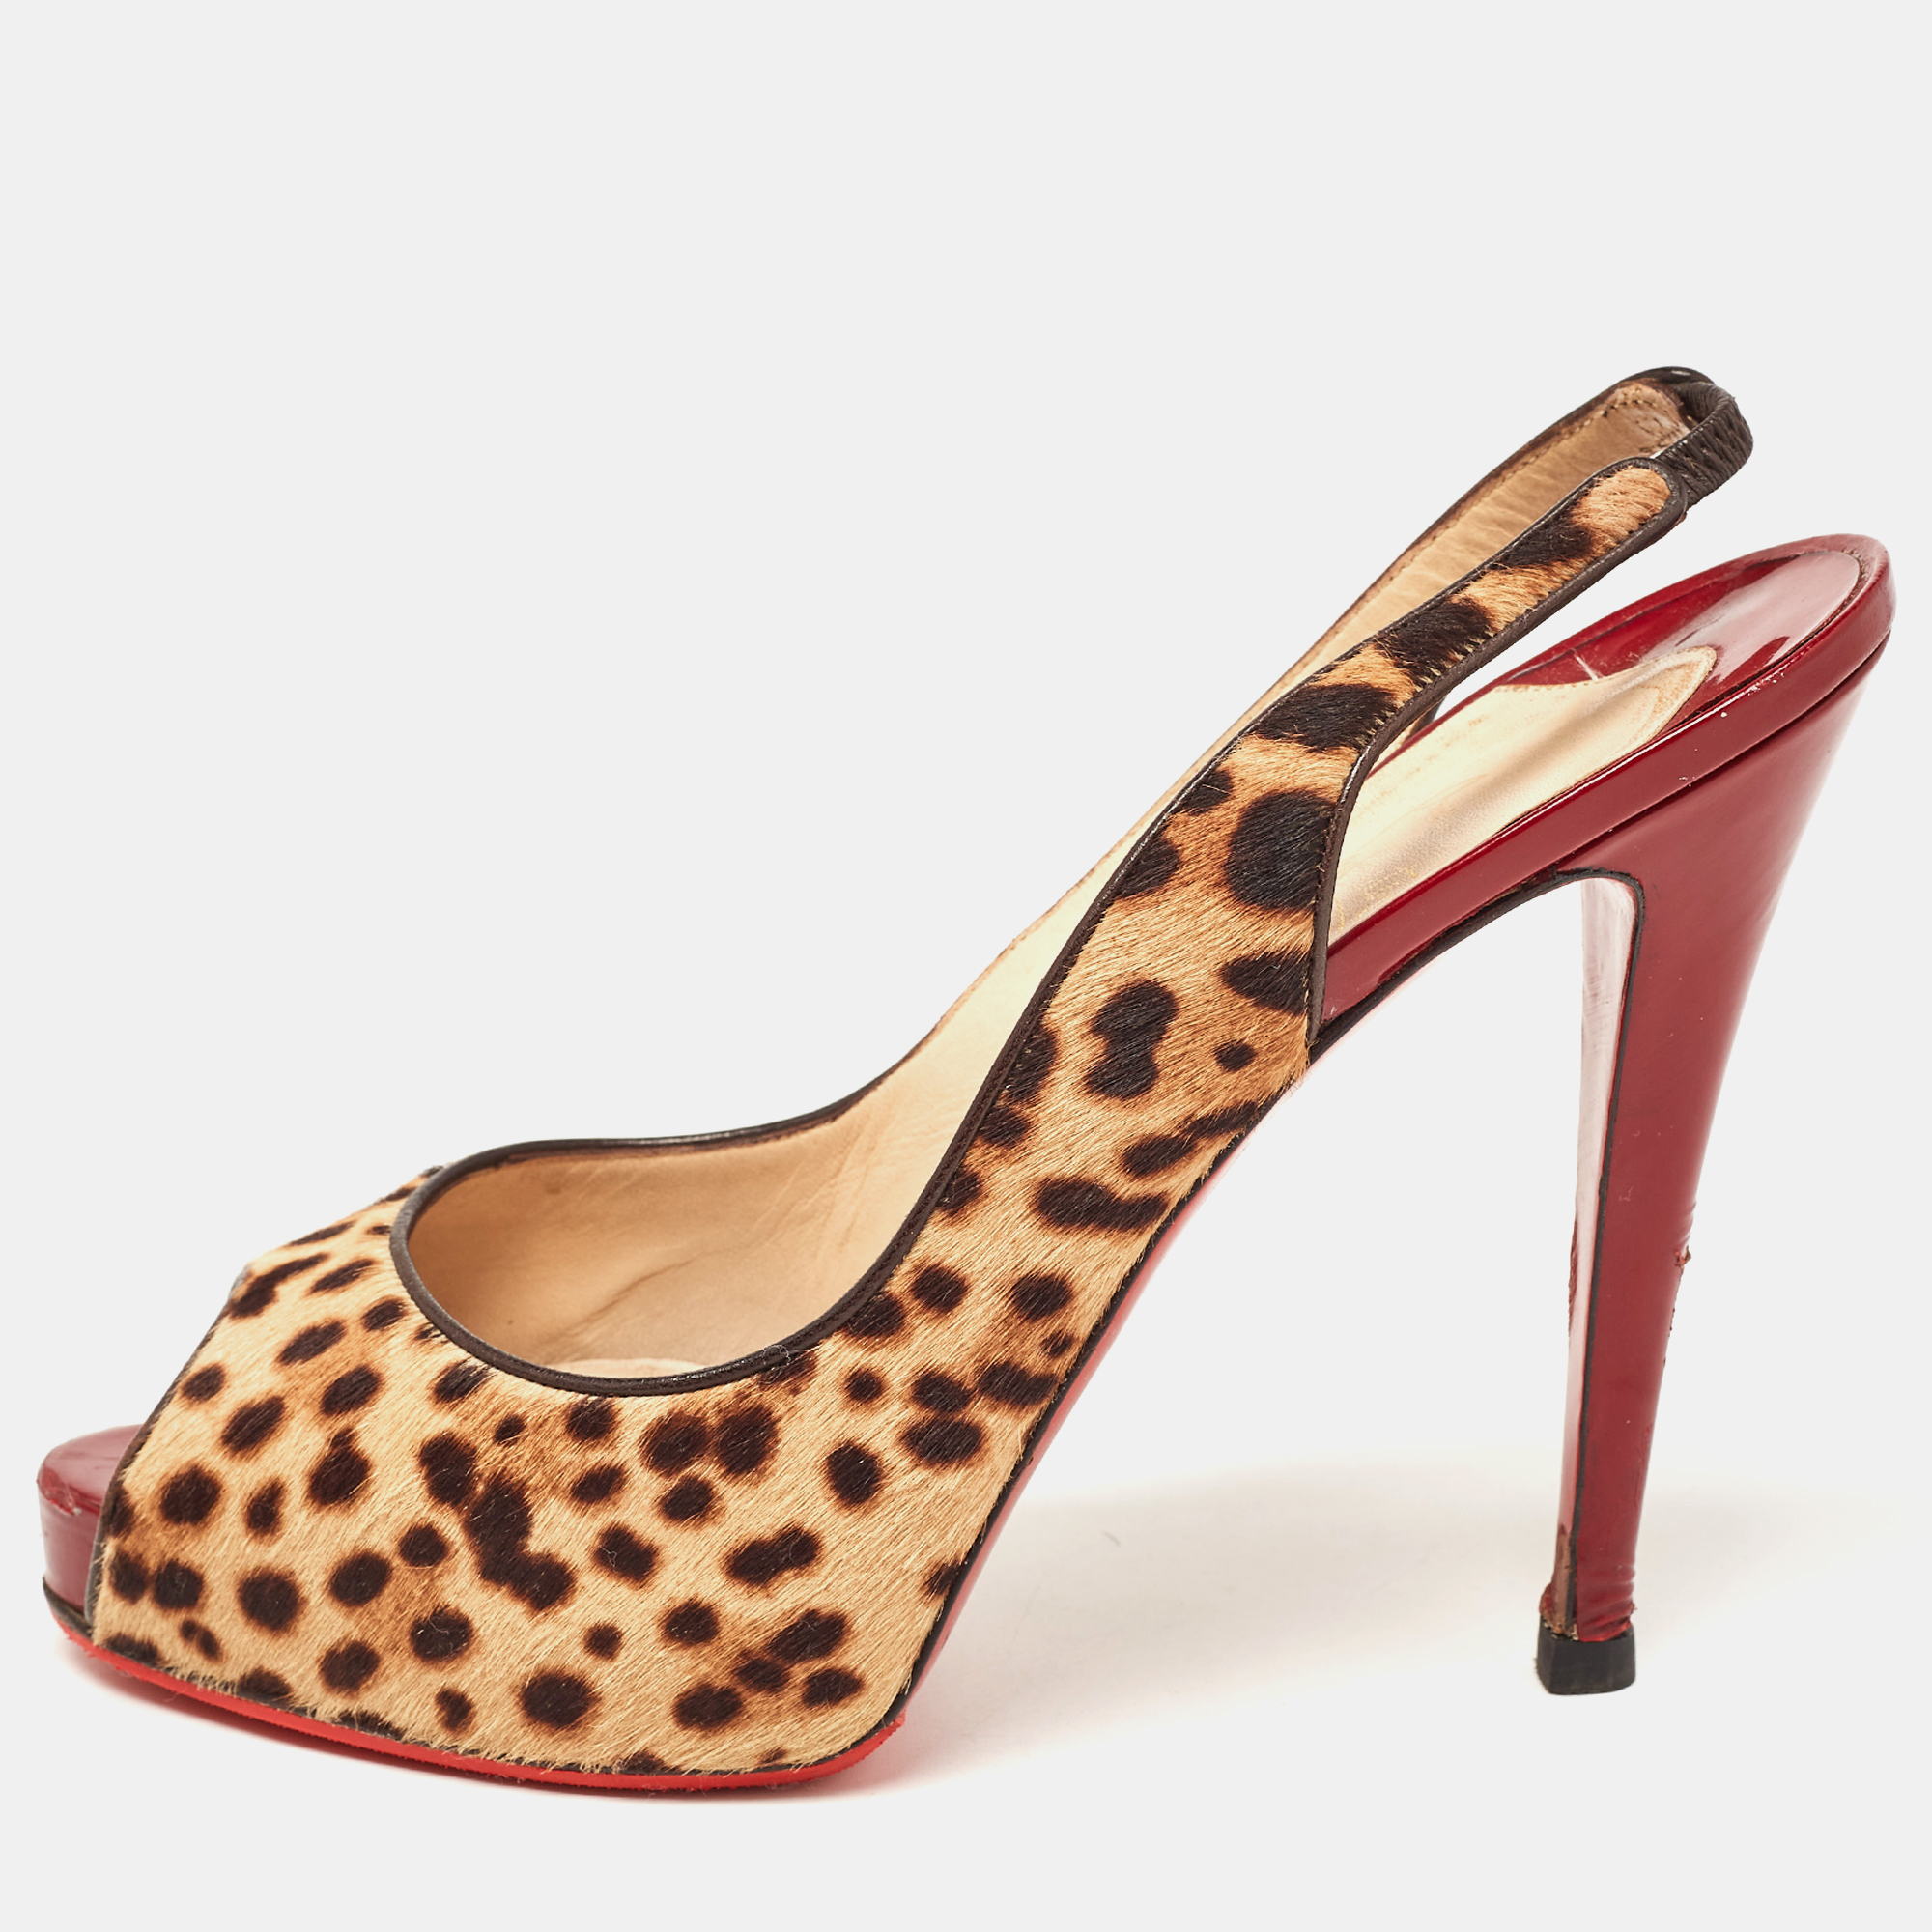 Pre-owned Christian Louboutin Beige/brown Leopard Print Calf Hair No Prive Slingback Pumps Size 41